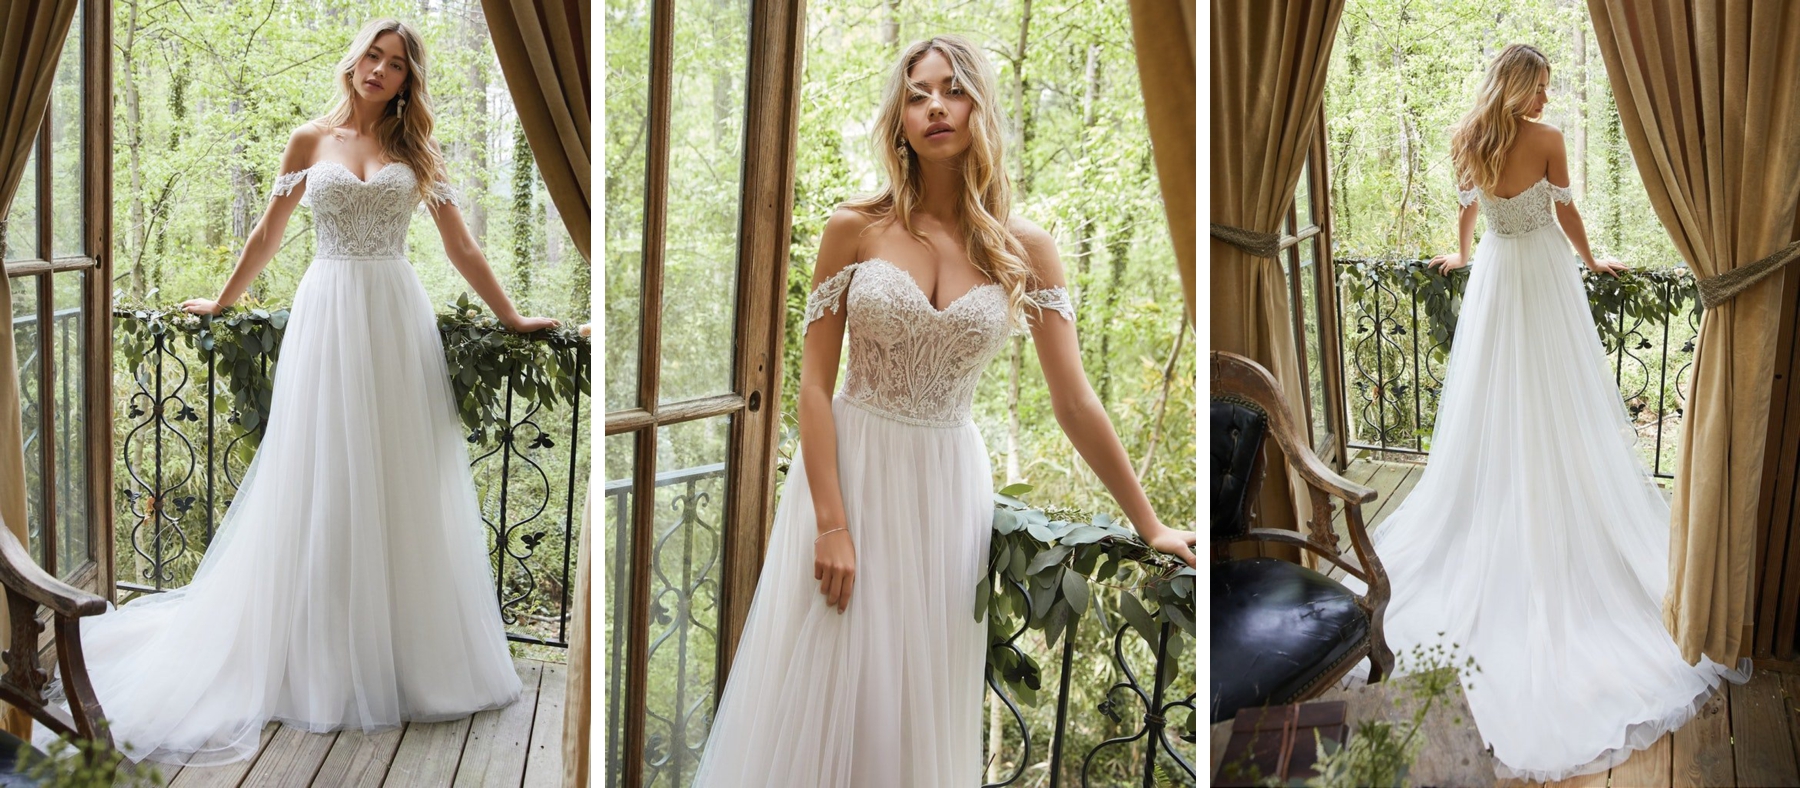 The best gowns for your Savannah Elopement from Ivory And Beau Bridal Boutique